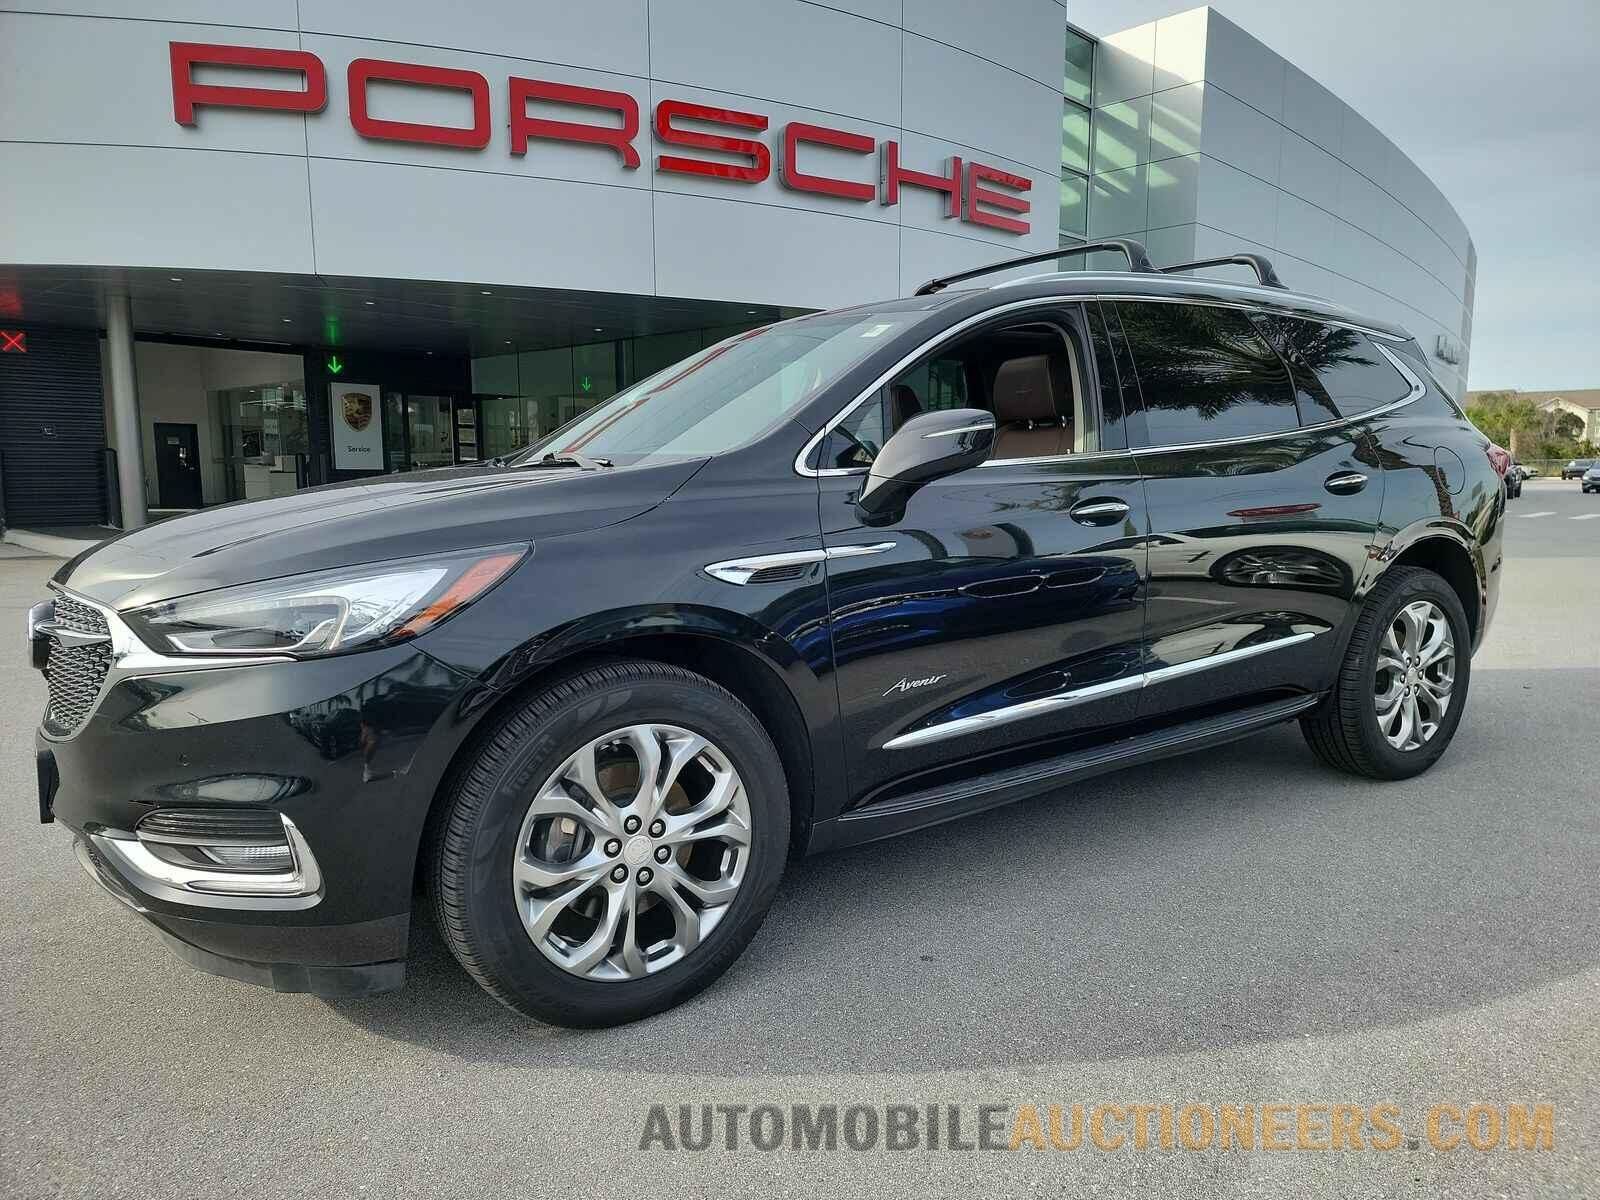 5GAEVCKW5JJ211010 Buick Enclave 2018